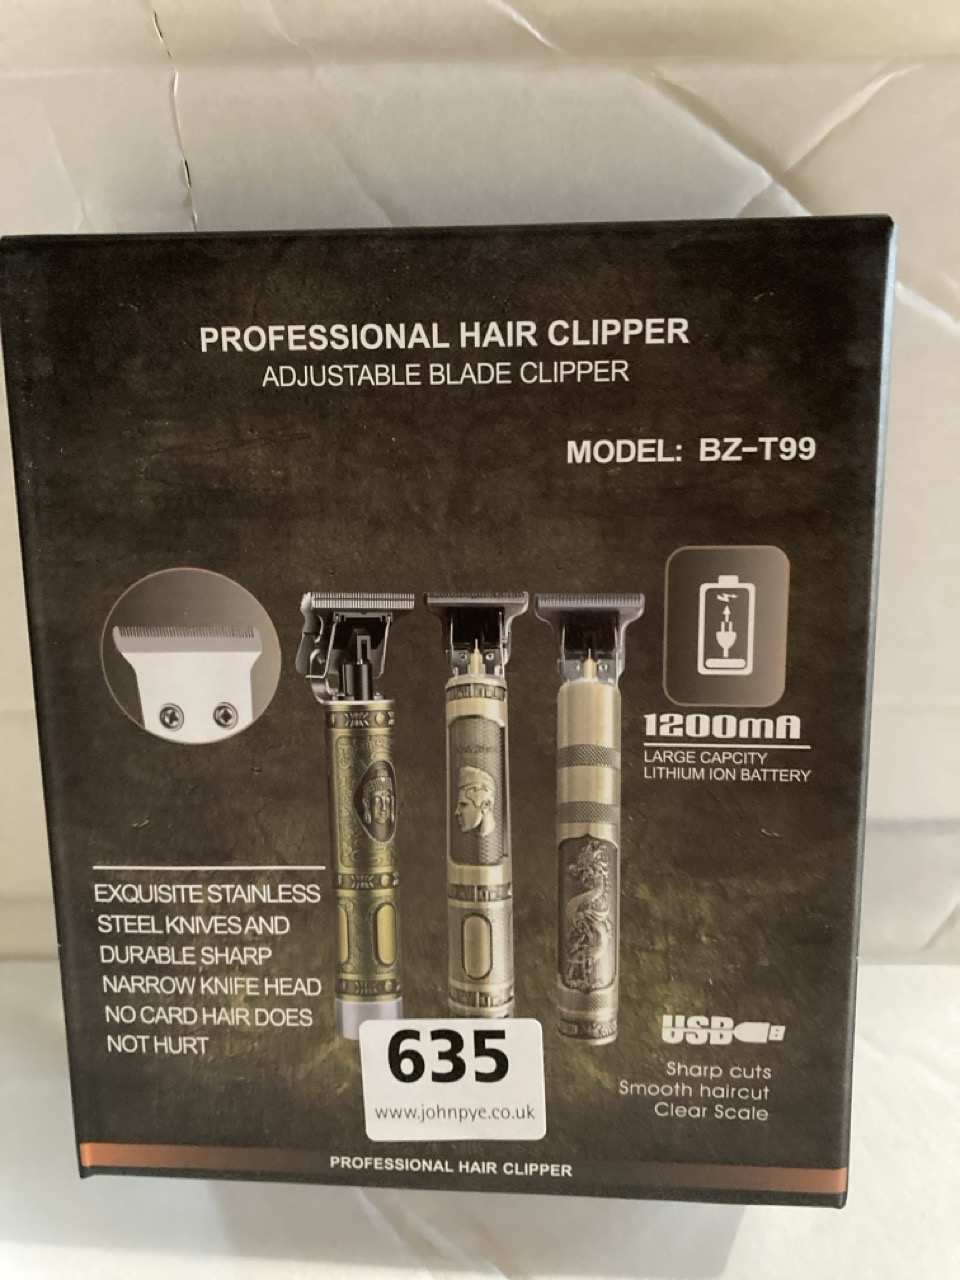 3 X TRIBAL, BZ-T99 PROFESSIONAL ADJUSTABLE HAIR CLIPPERS, STAINLESS STEEL BLADE, PRECISION STYLING. USB CHARGING.